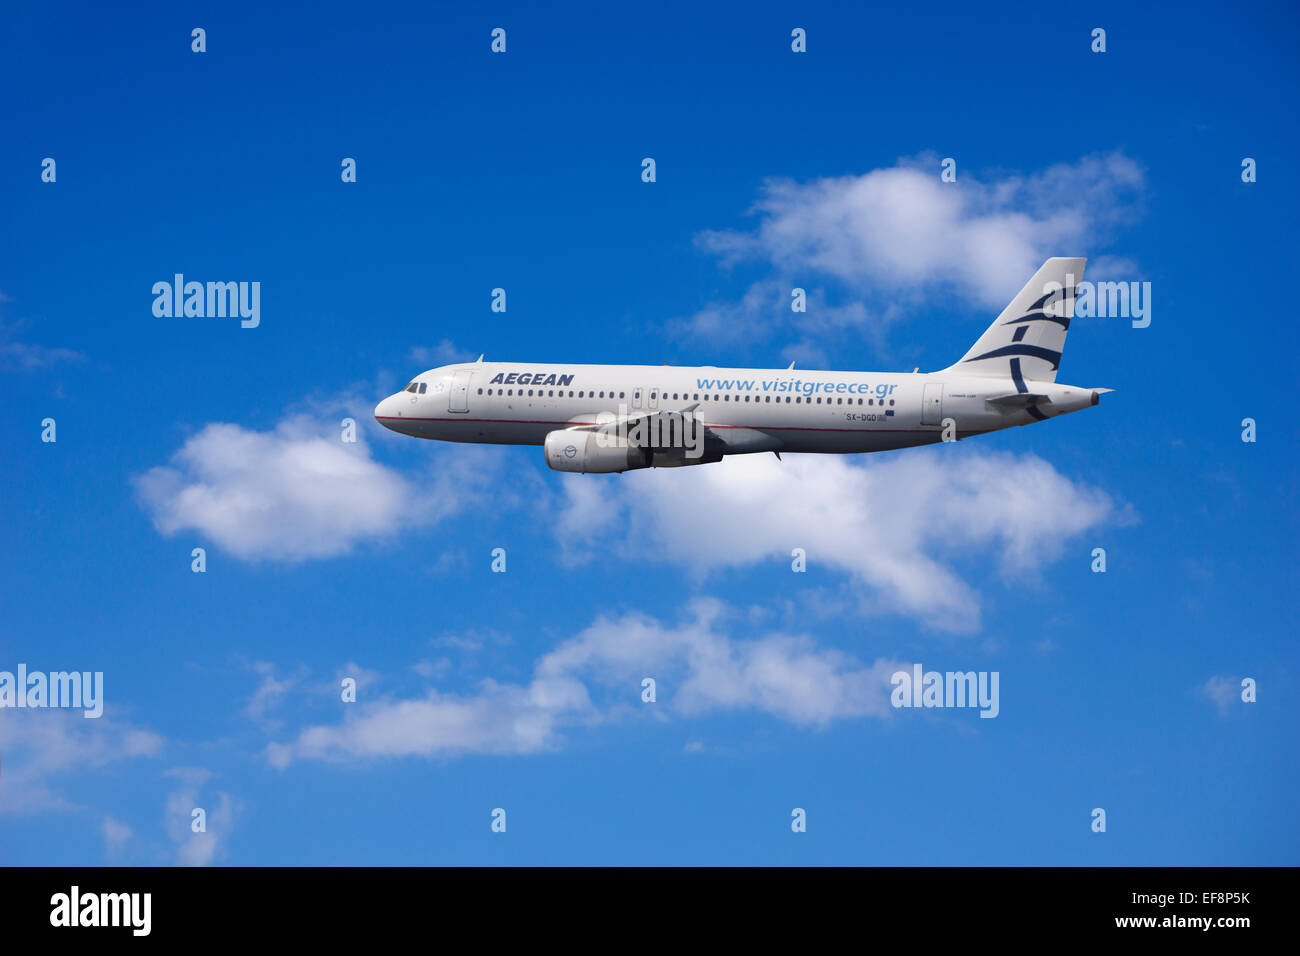 SX-DGD Aegean Airlines Airbus A320-232 in flight Stock Photo